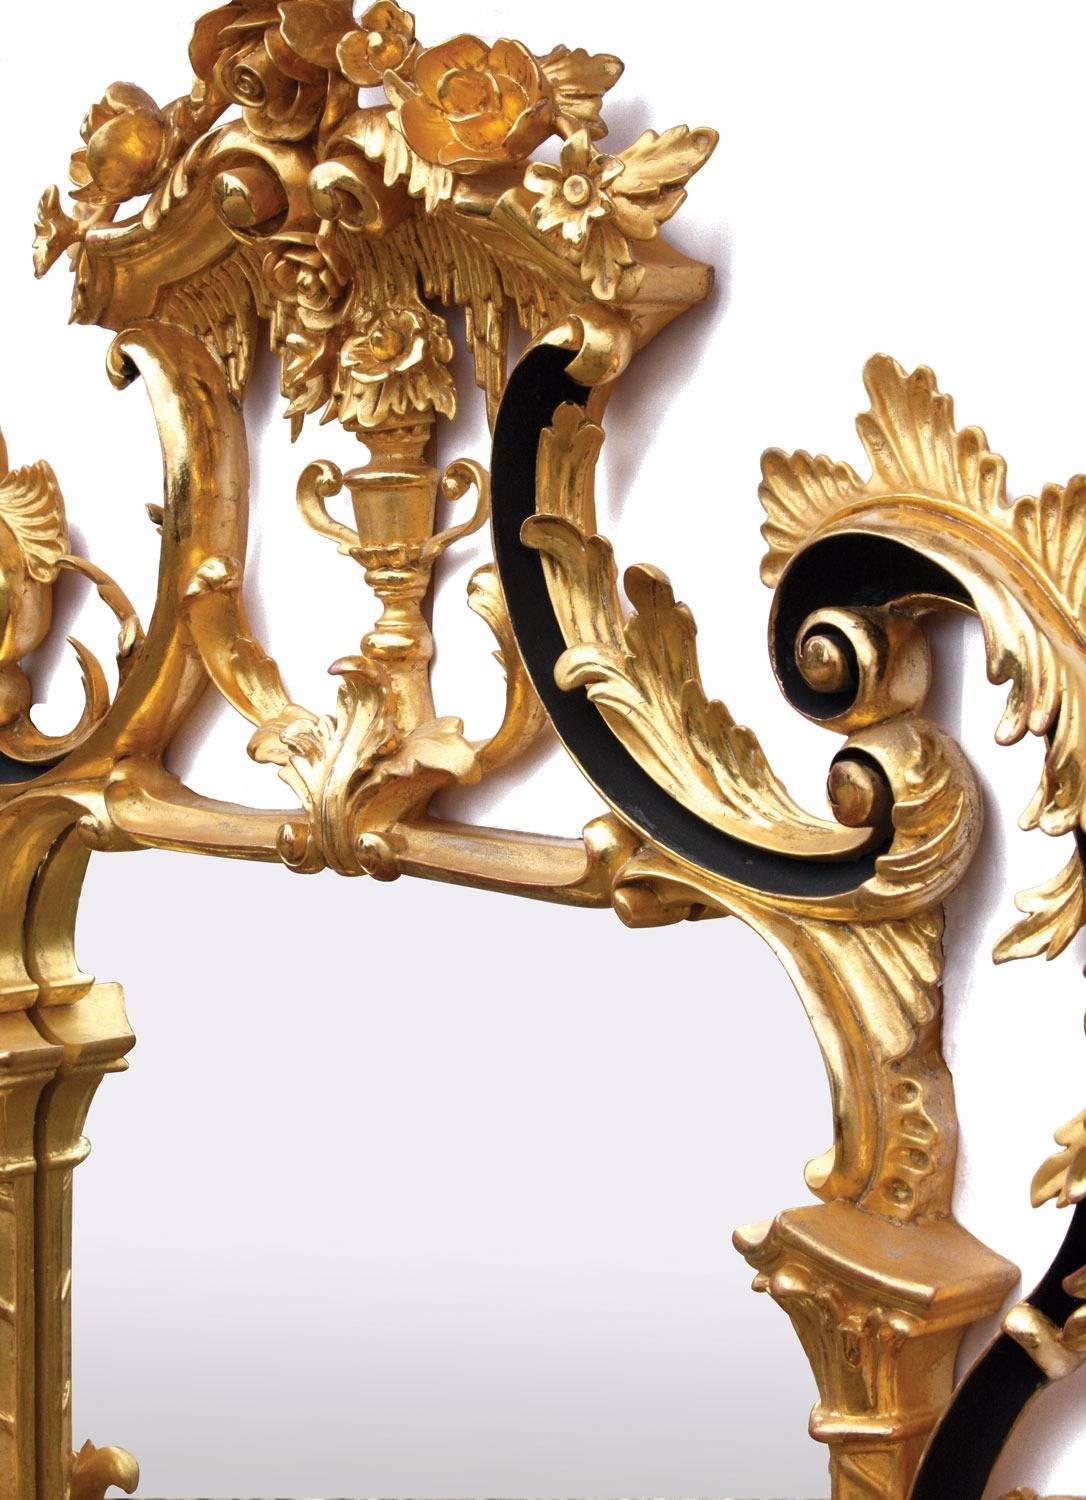 A giltwood wall mirror after an original from our archives originating from Biggs of Maidenhead, run by our family. Entirely hand-carved in mahogany and water gilded in 23¾-carat gold leaf, toned with a ‘bright and matte’ effect, the highlighted